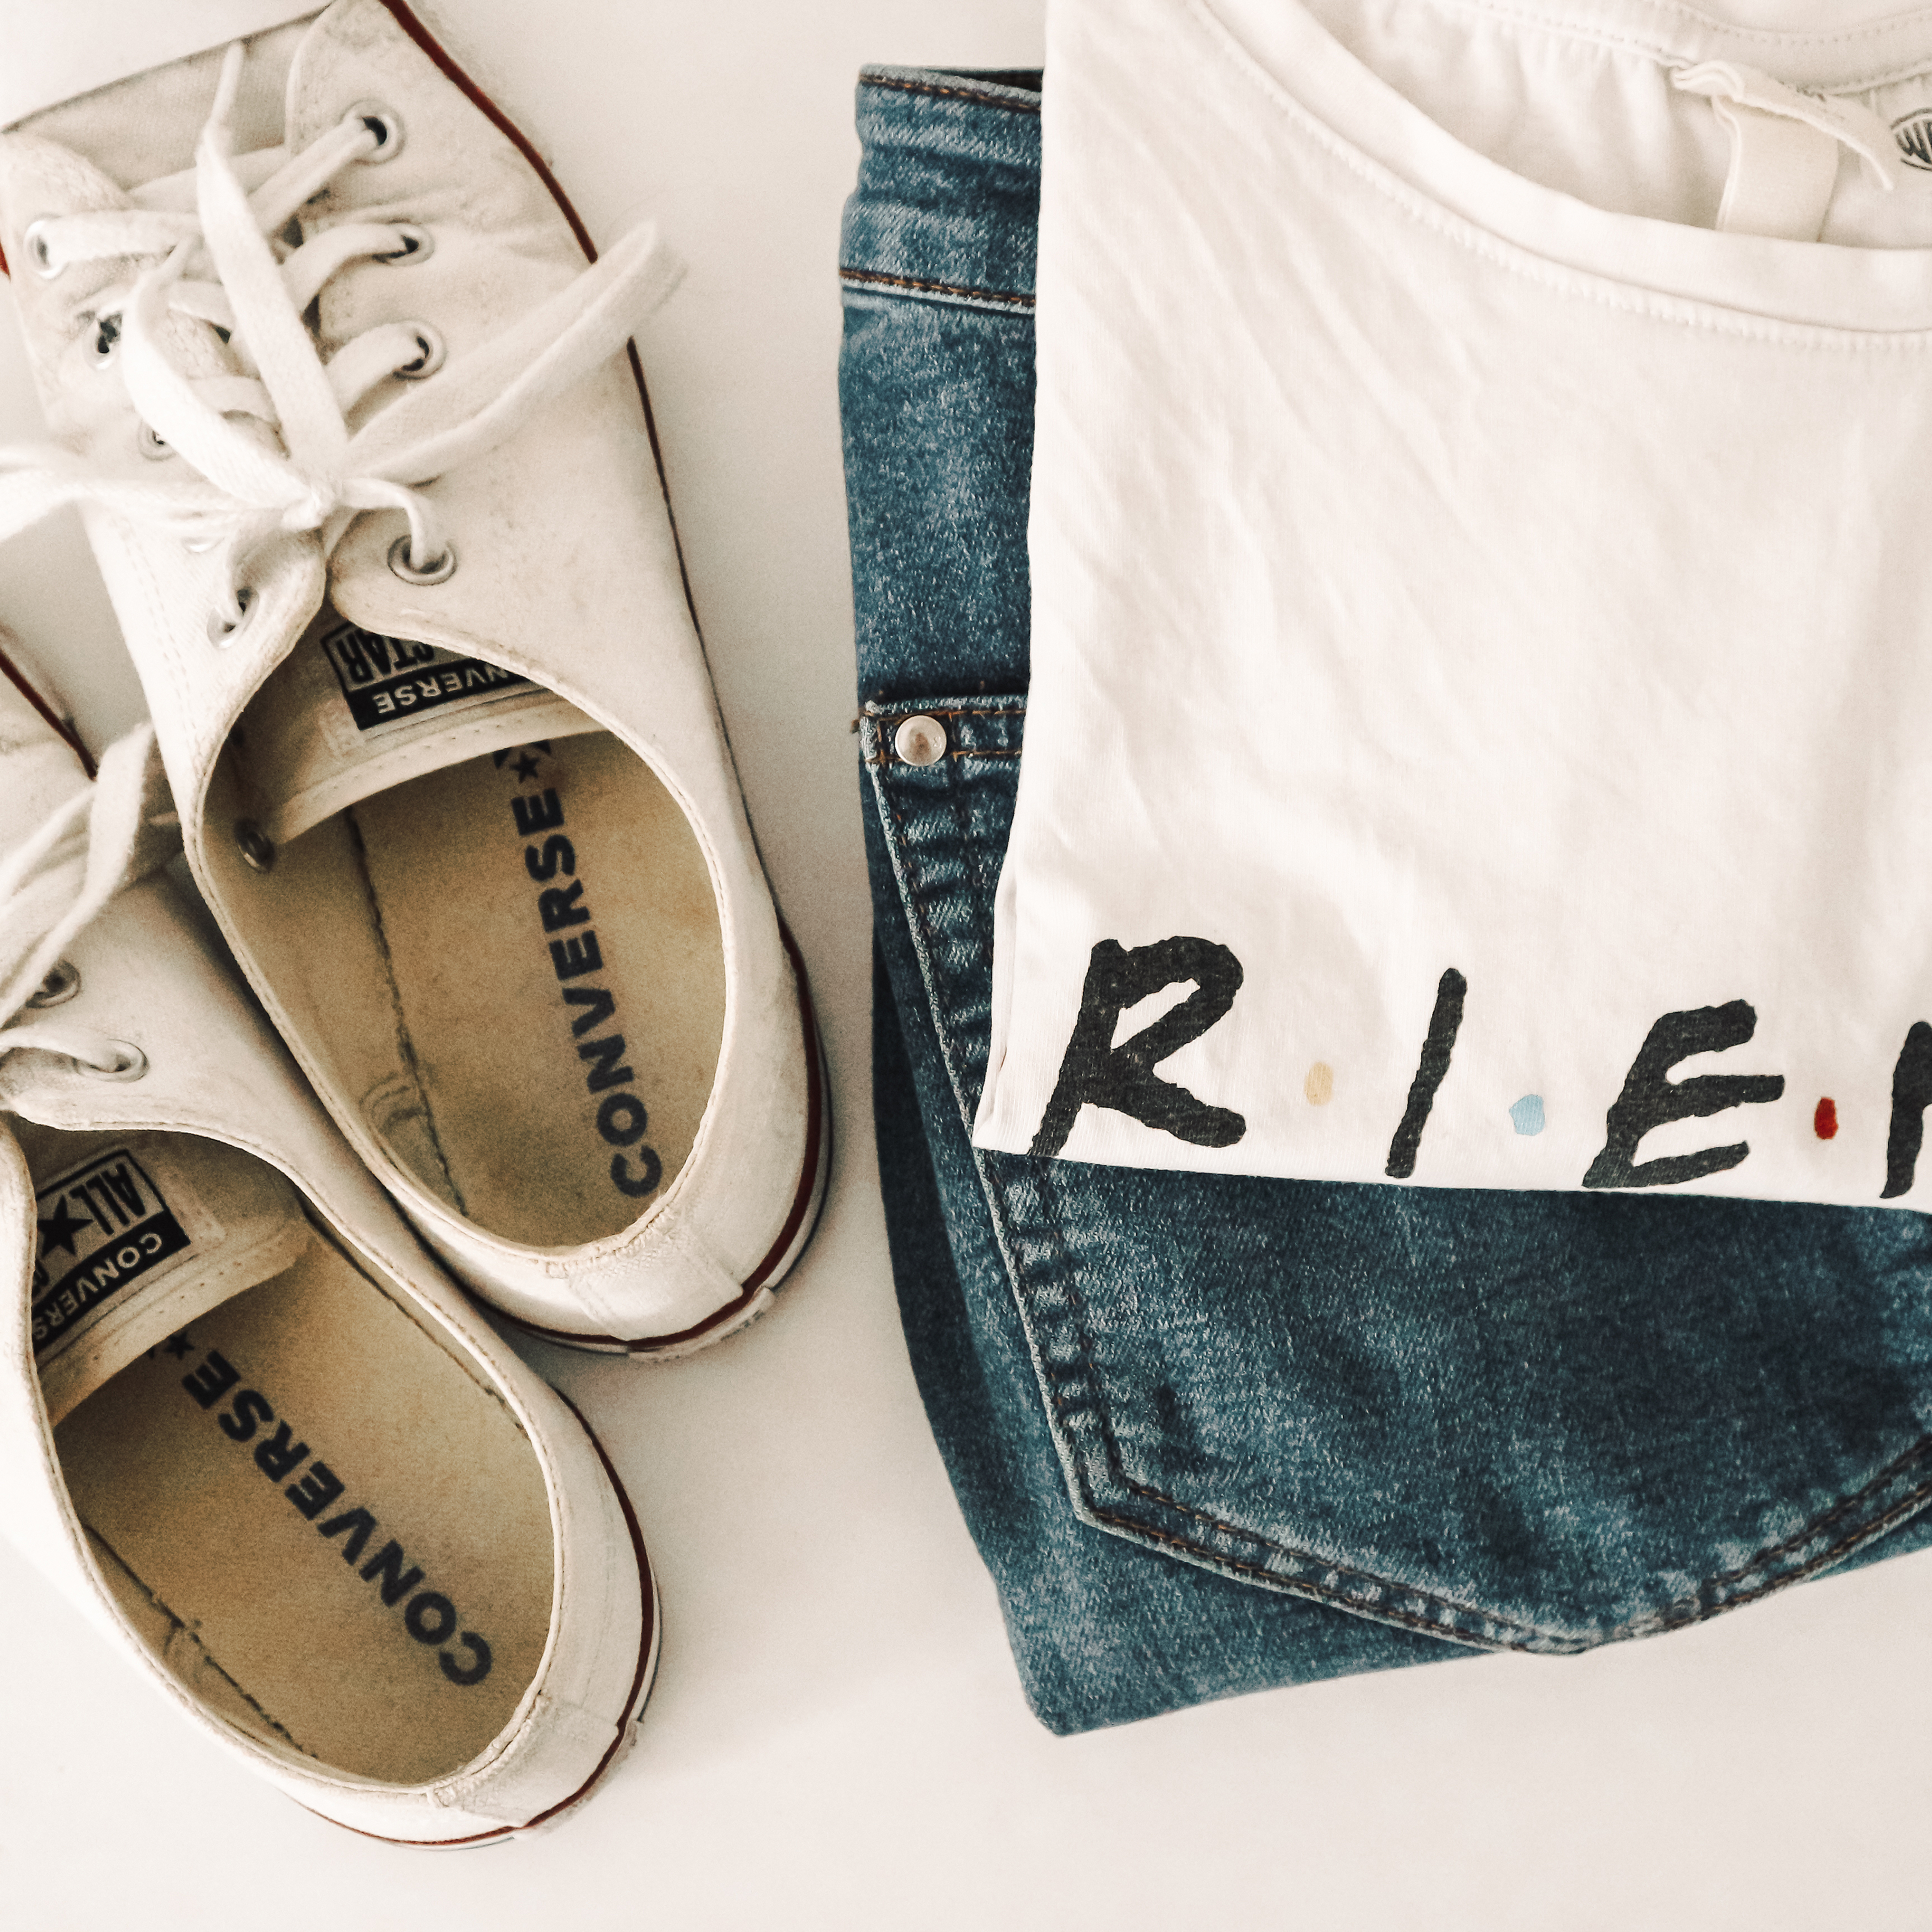 Friends T-Shirt, jeans and white Converse.